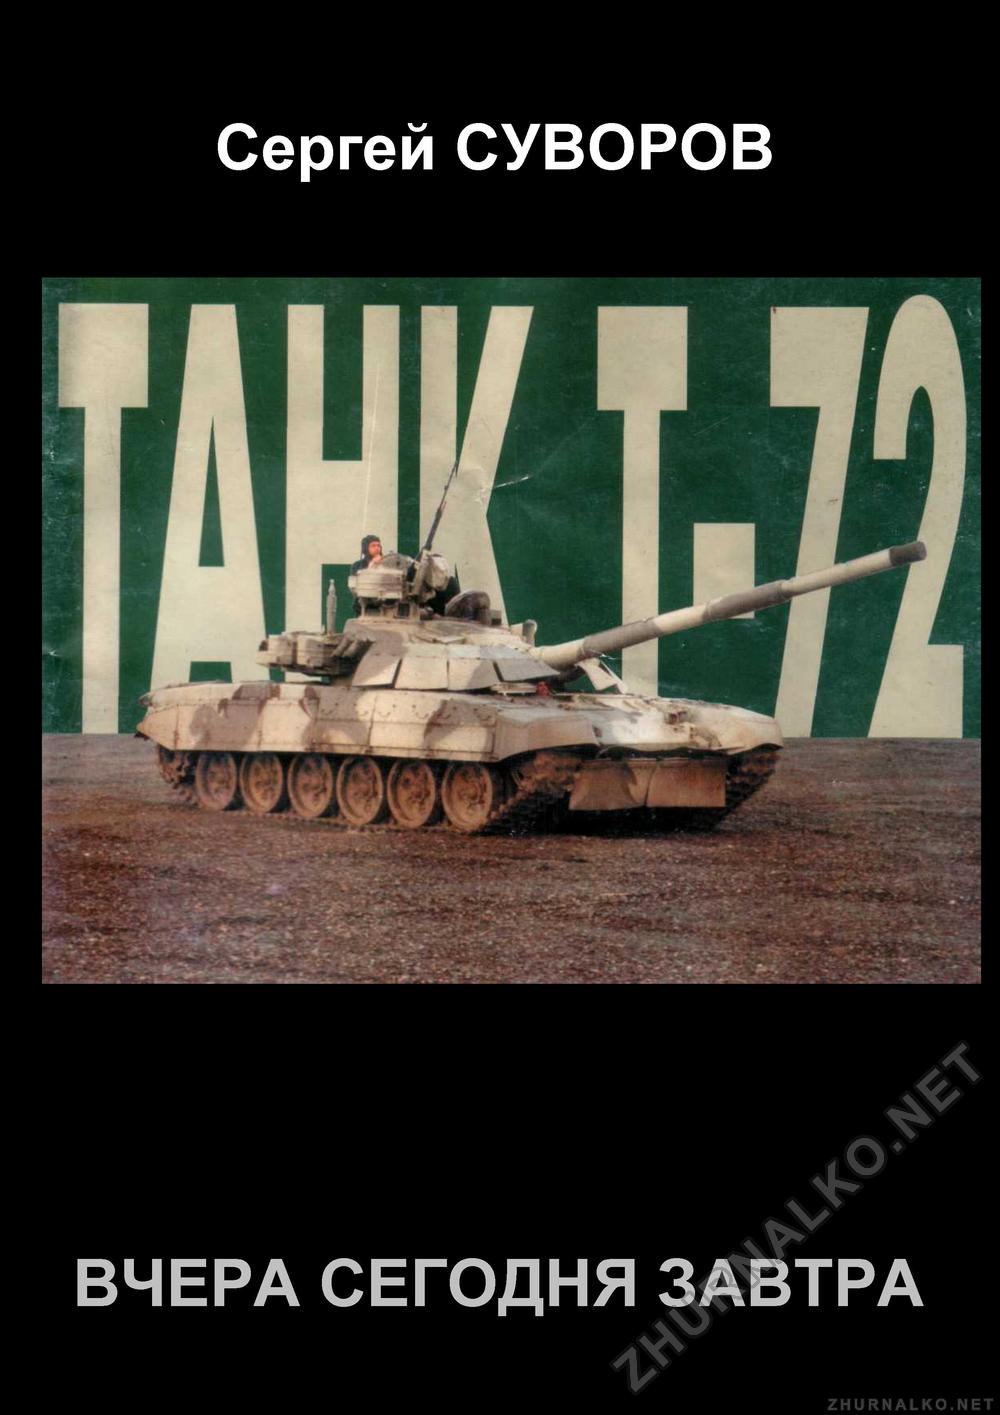  Special -  T-72,  1